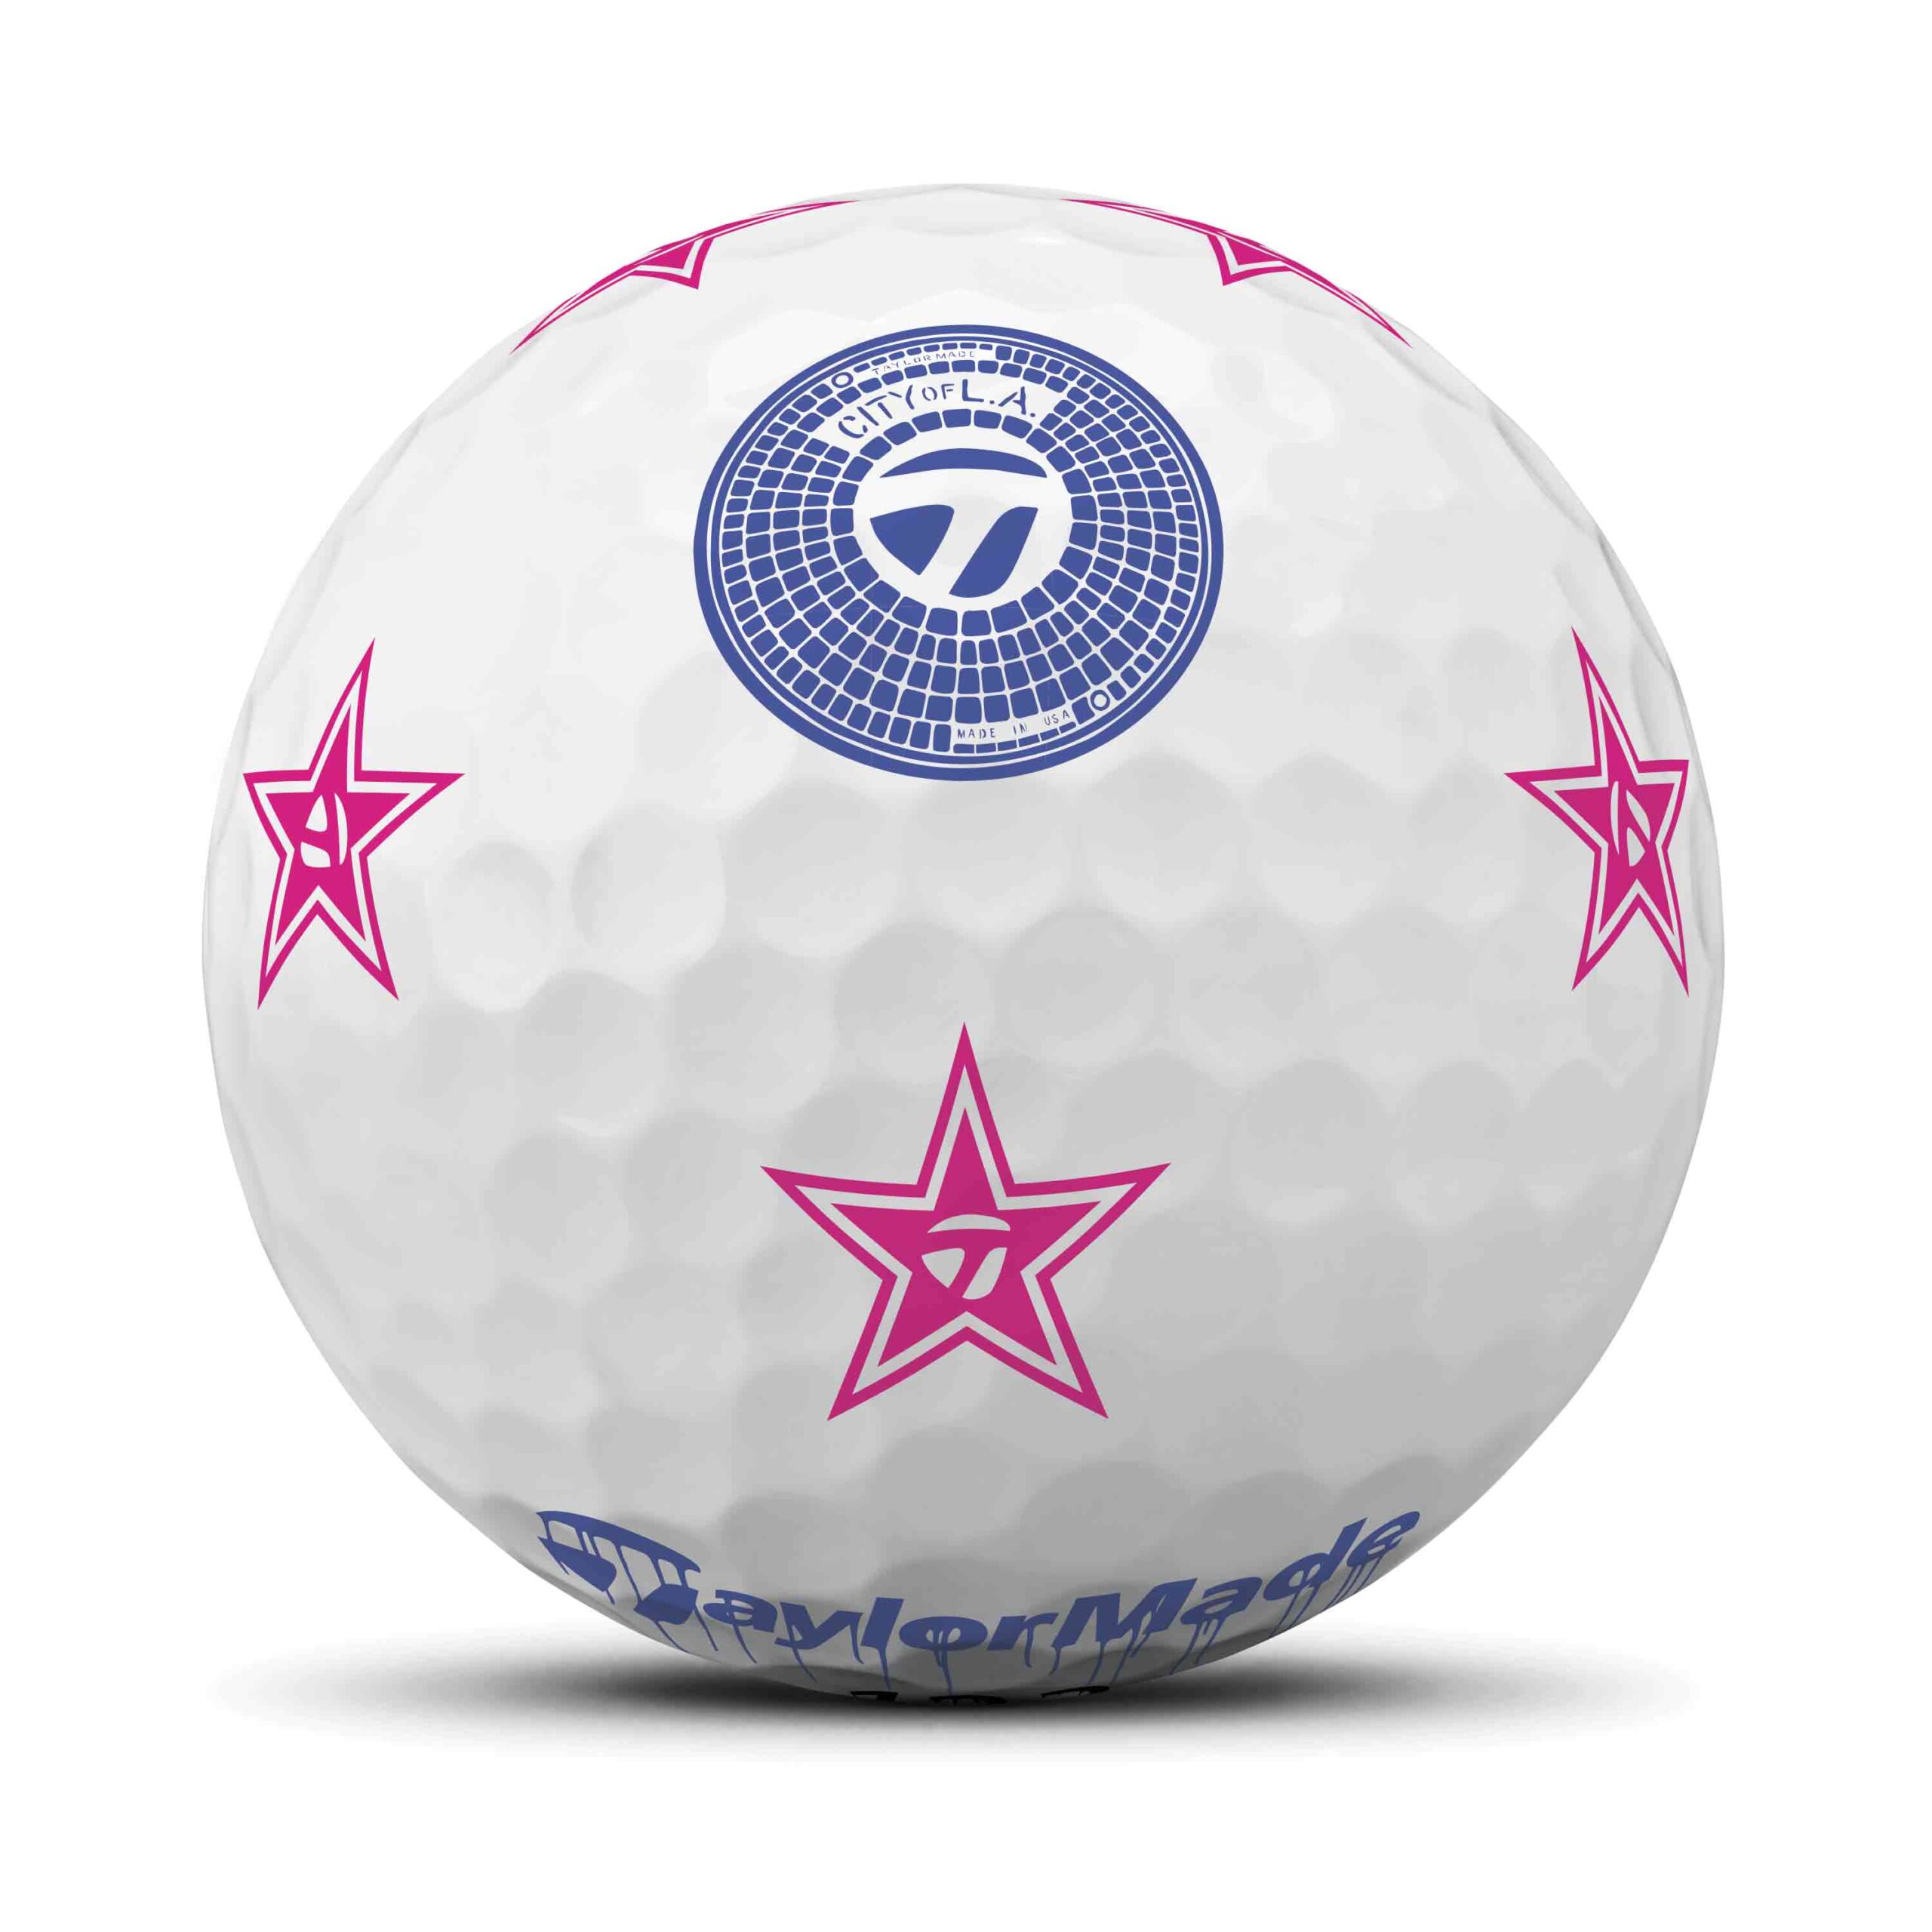 Check out TaylorMade's new U.S. Open-themed TP5 pix golf balls